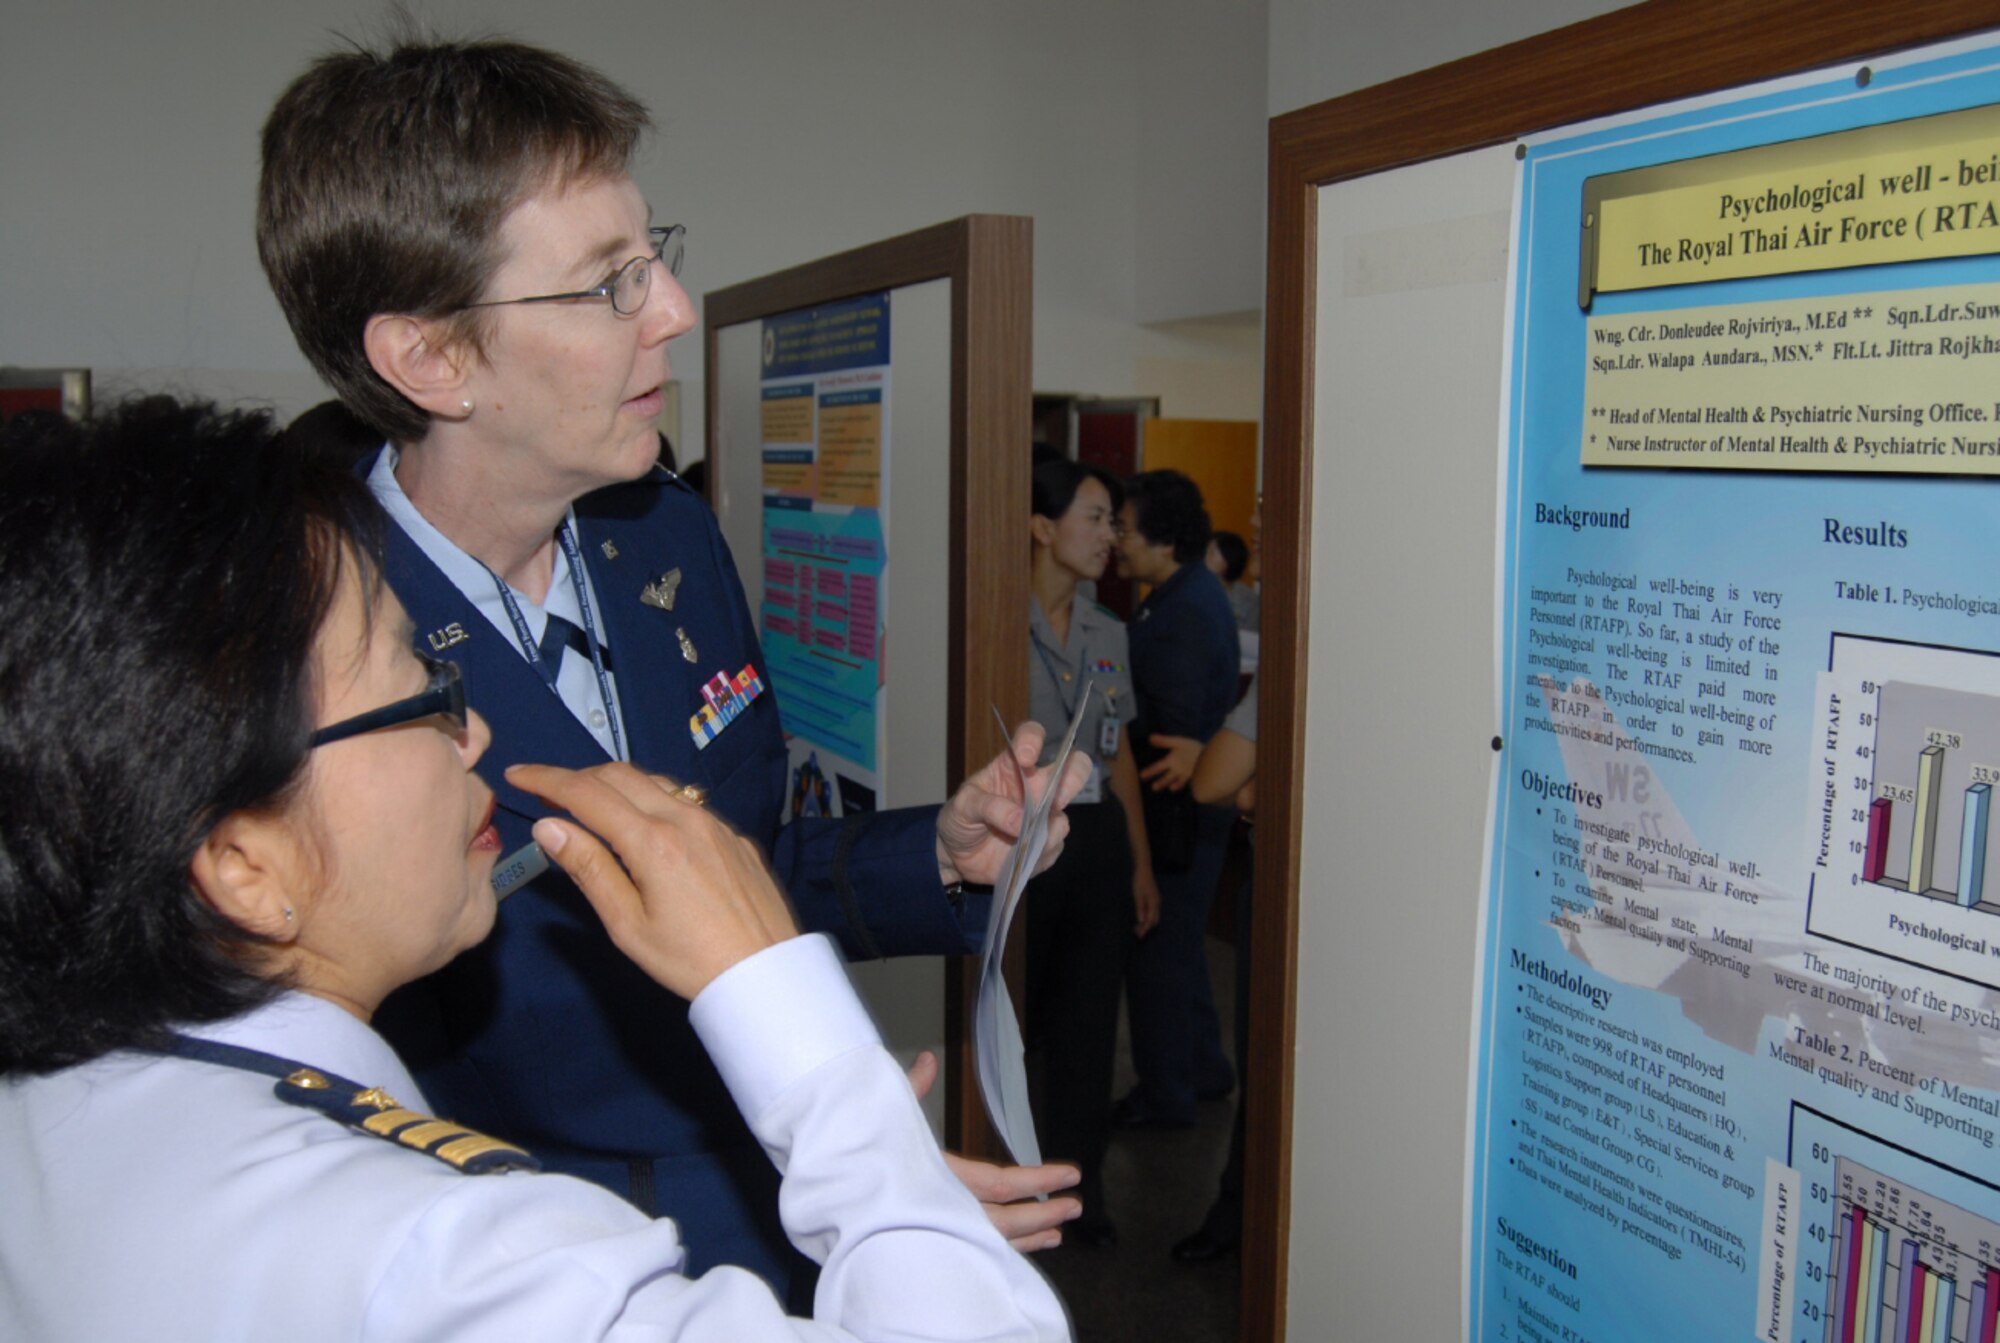 DAEJEON, Republic of Korea - Col. Elizabeth Bridges, a Reservist with the Clinical Investigative Facility at Travis Air Force Base discusses information a visual aid from Wing Commander Donleudee Rojviriya's presentation about the psychological well-being of Royal Thai Air Force personnel with Commander Rojviriya from the Royal Thai Air Force Nursing College.
